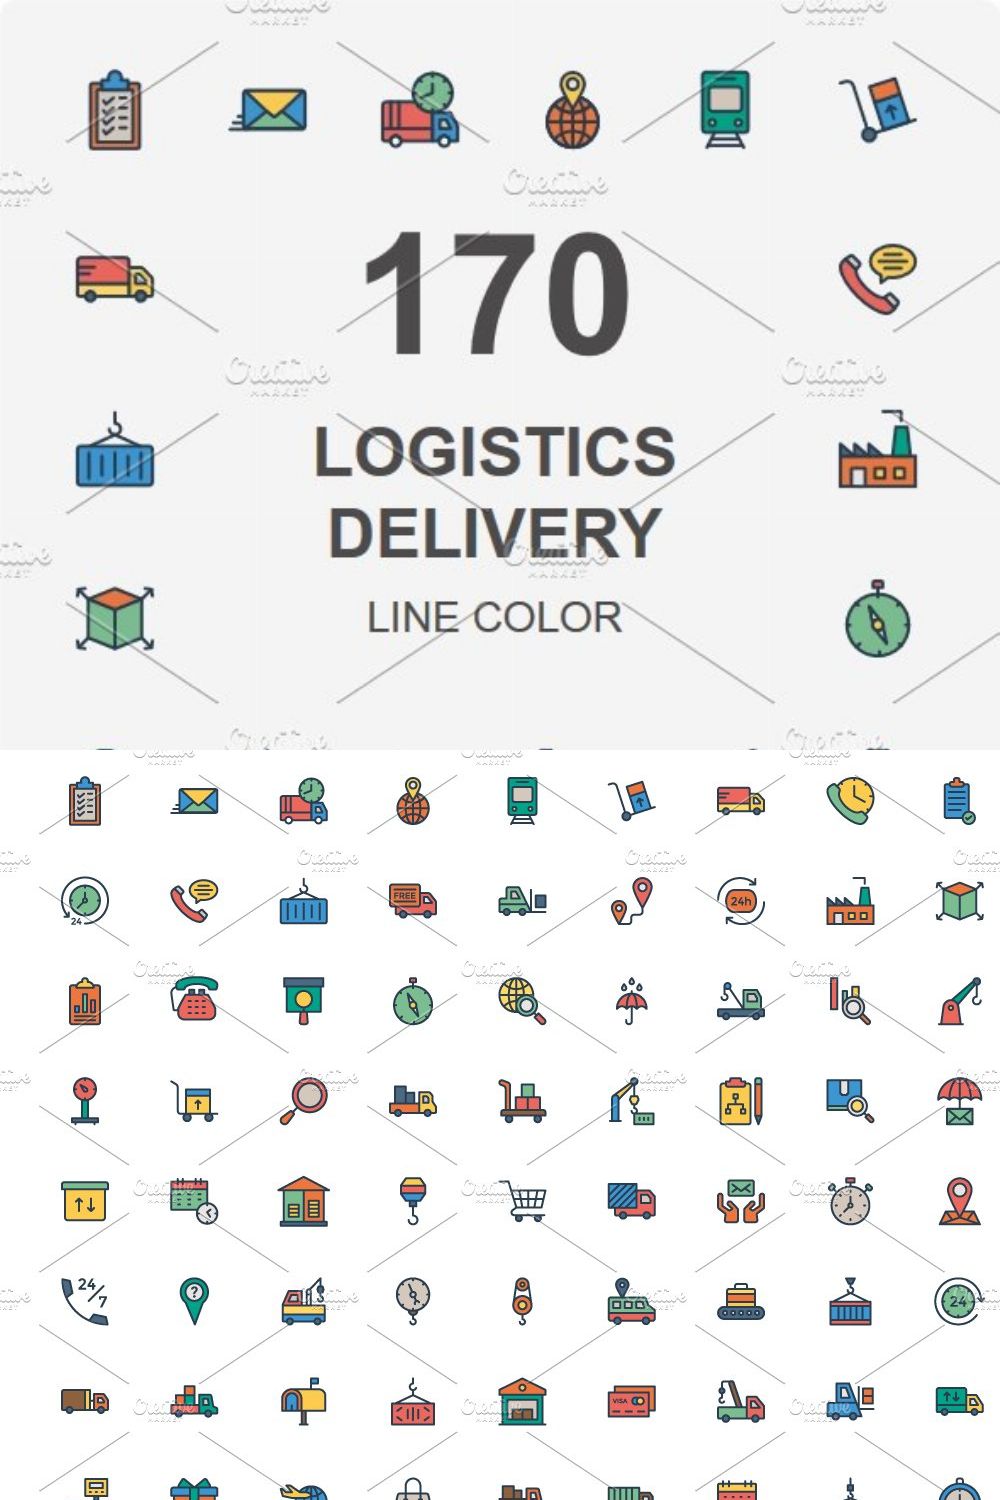 Logistic Delivery line color icons pinterest preview image.